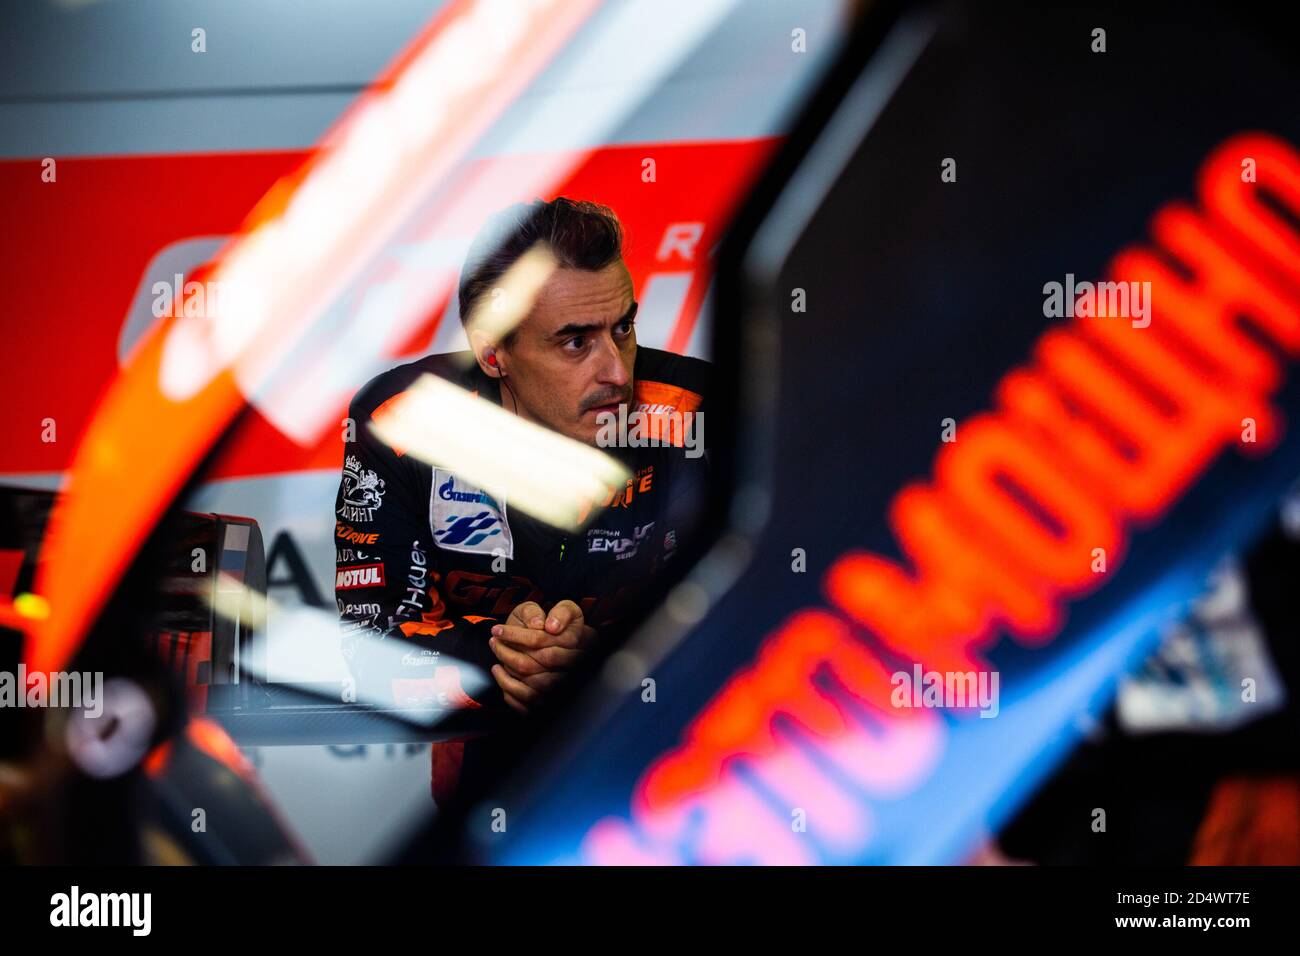 Monza, Italy. 11th October, 2020. Rusinov Roman (rus), G-Drive Racing, Oreca 07 Gibson, ambiance, portrait during the 2020 4 Hours of Monza, 4th round of the 2020 European Le Mans Series, from October 9 to 11, 2020 on the Autodromo Nazionale di Monza, Italy - Photo Germain Hazard / DPPI Credit: LM/DPPI/Germain Hazard/Alamy Live News Stock Photo